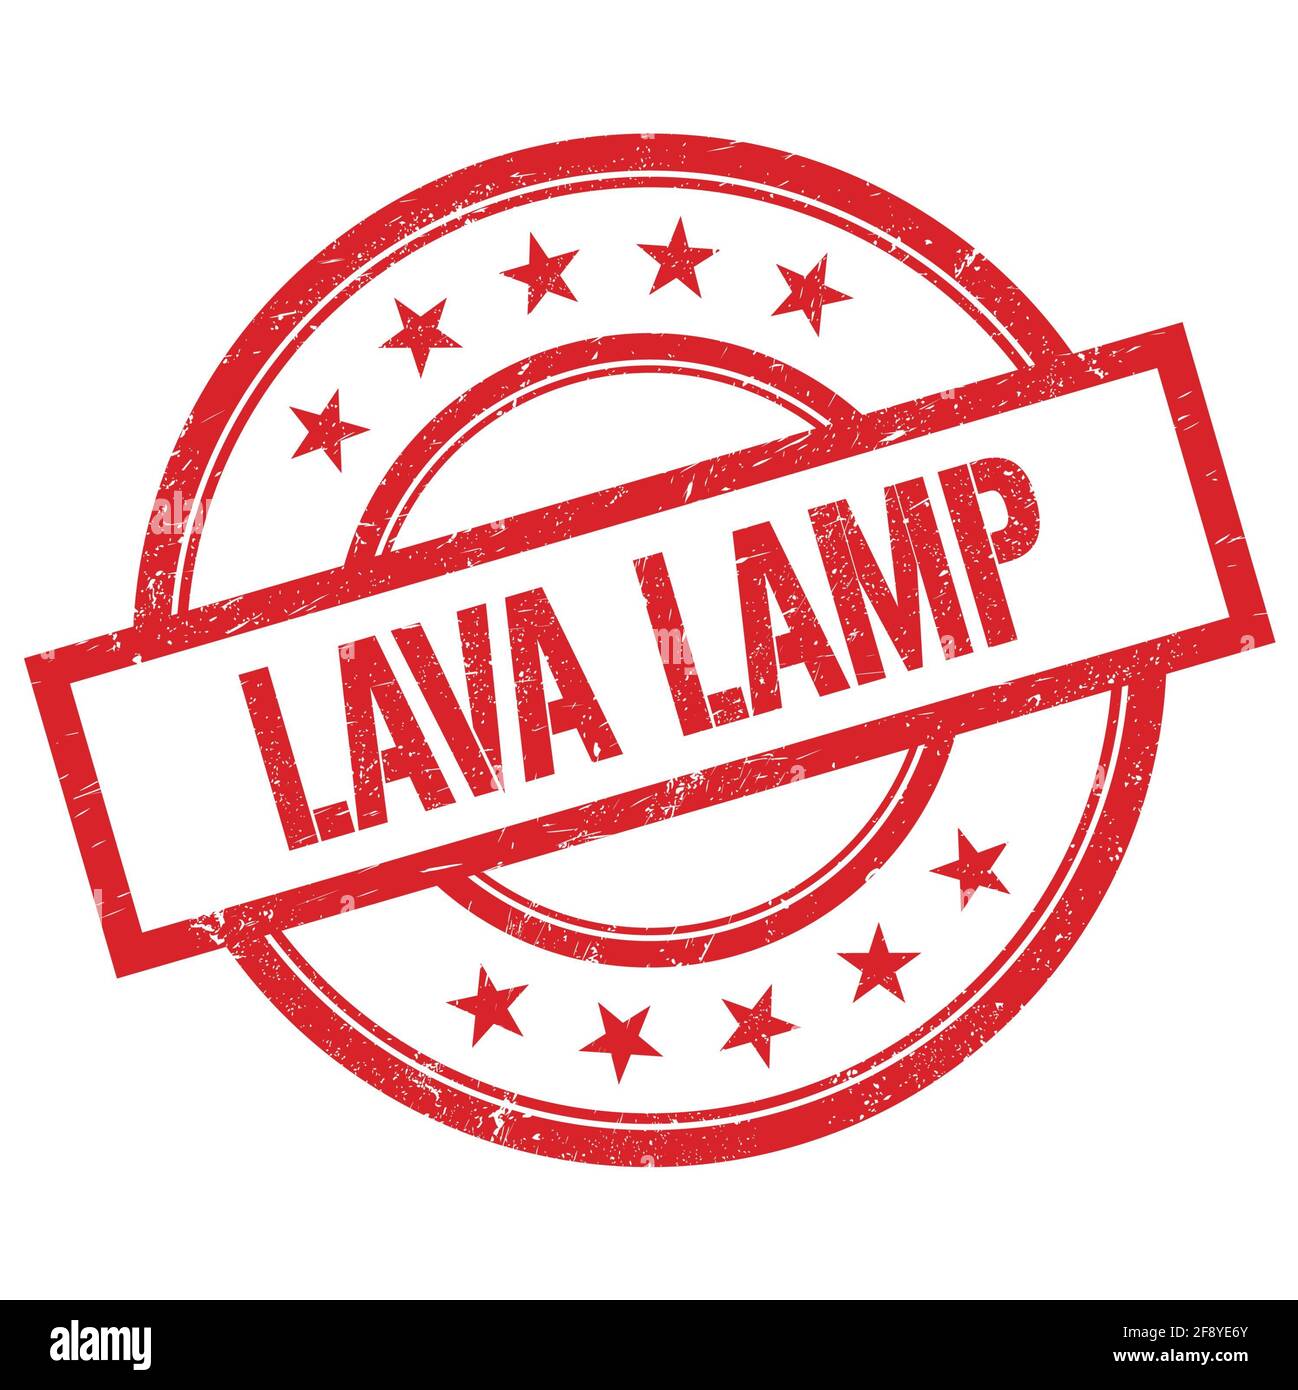 LAVA LAMP text written on red round vintage rubber stamp Stock Photo - Alamy